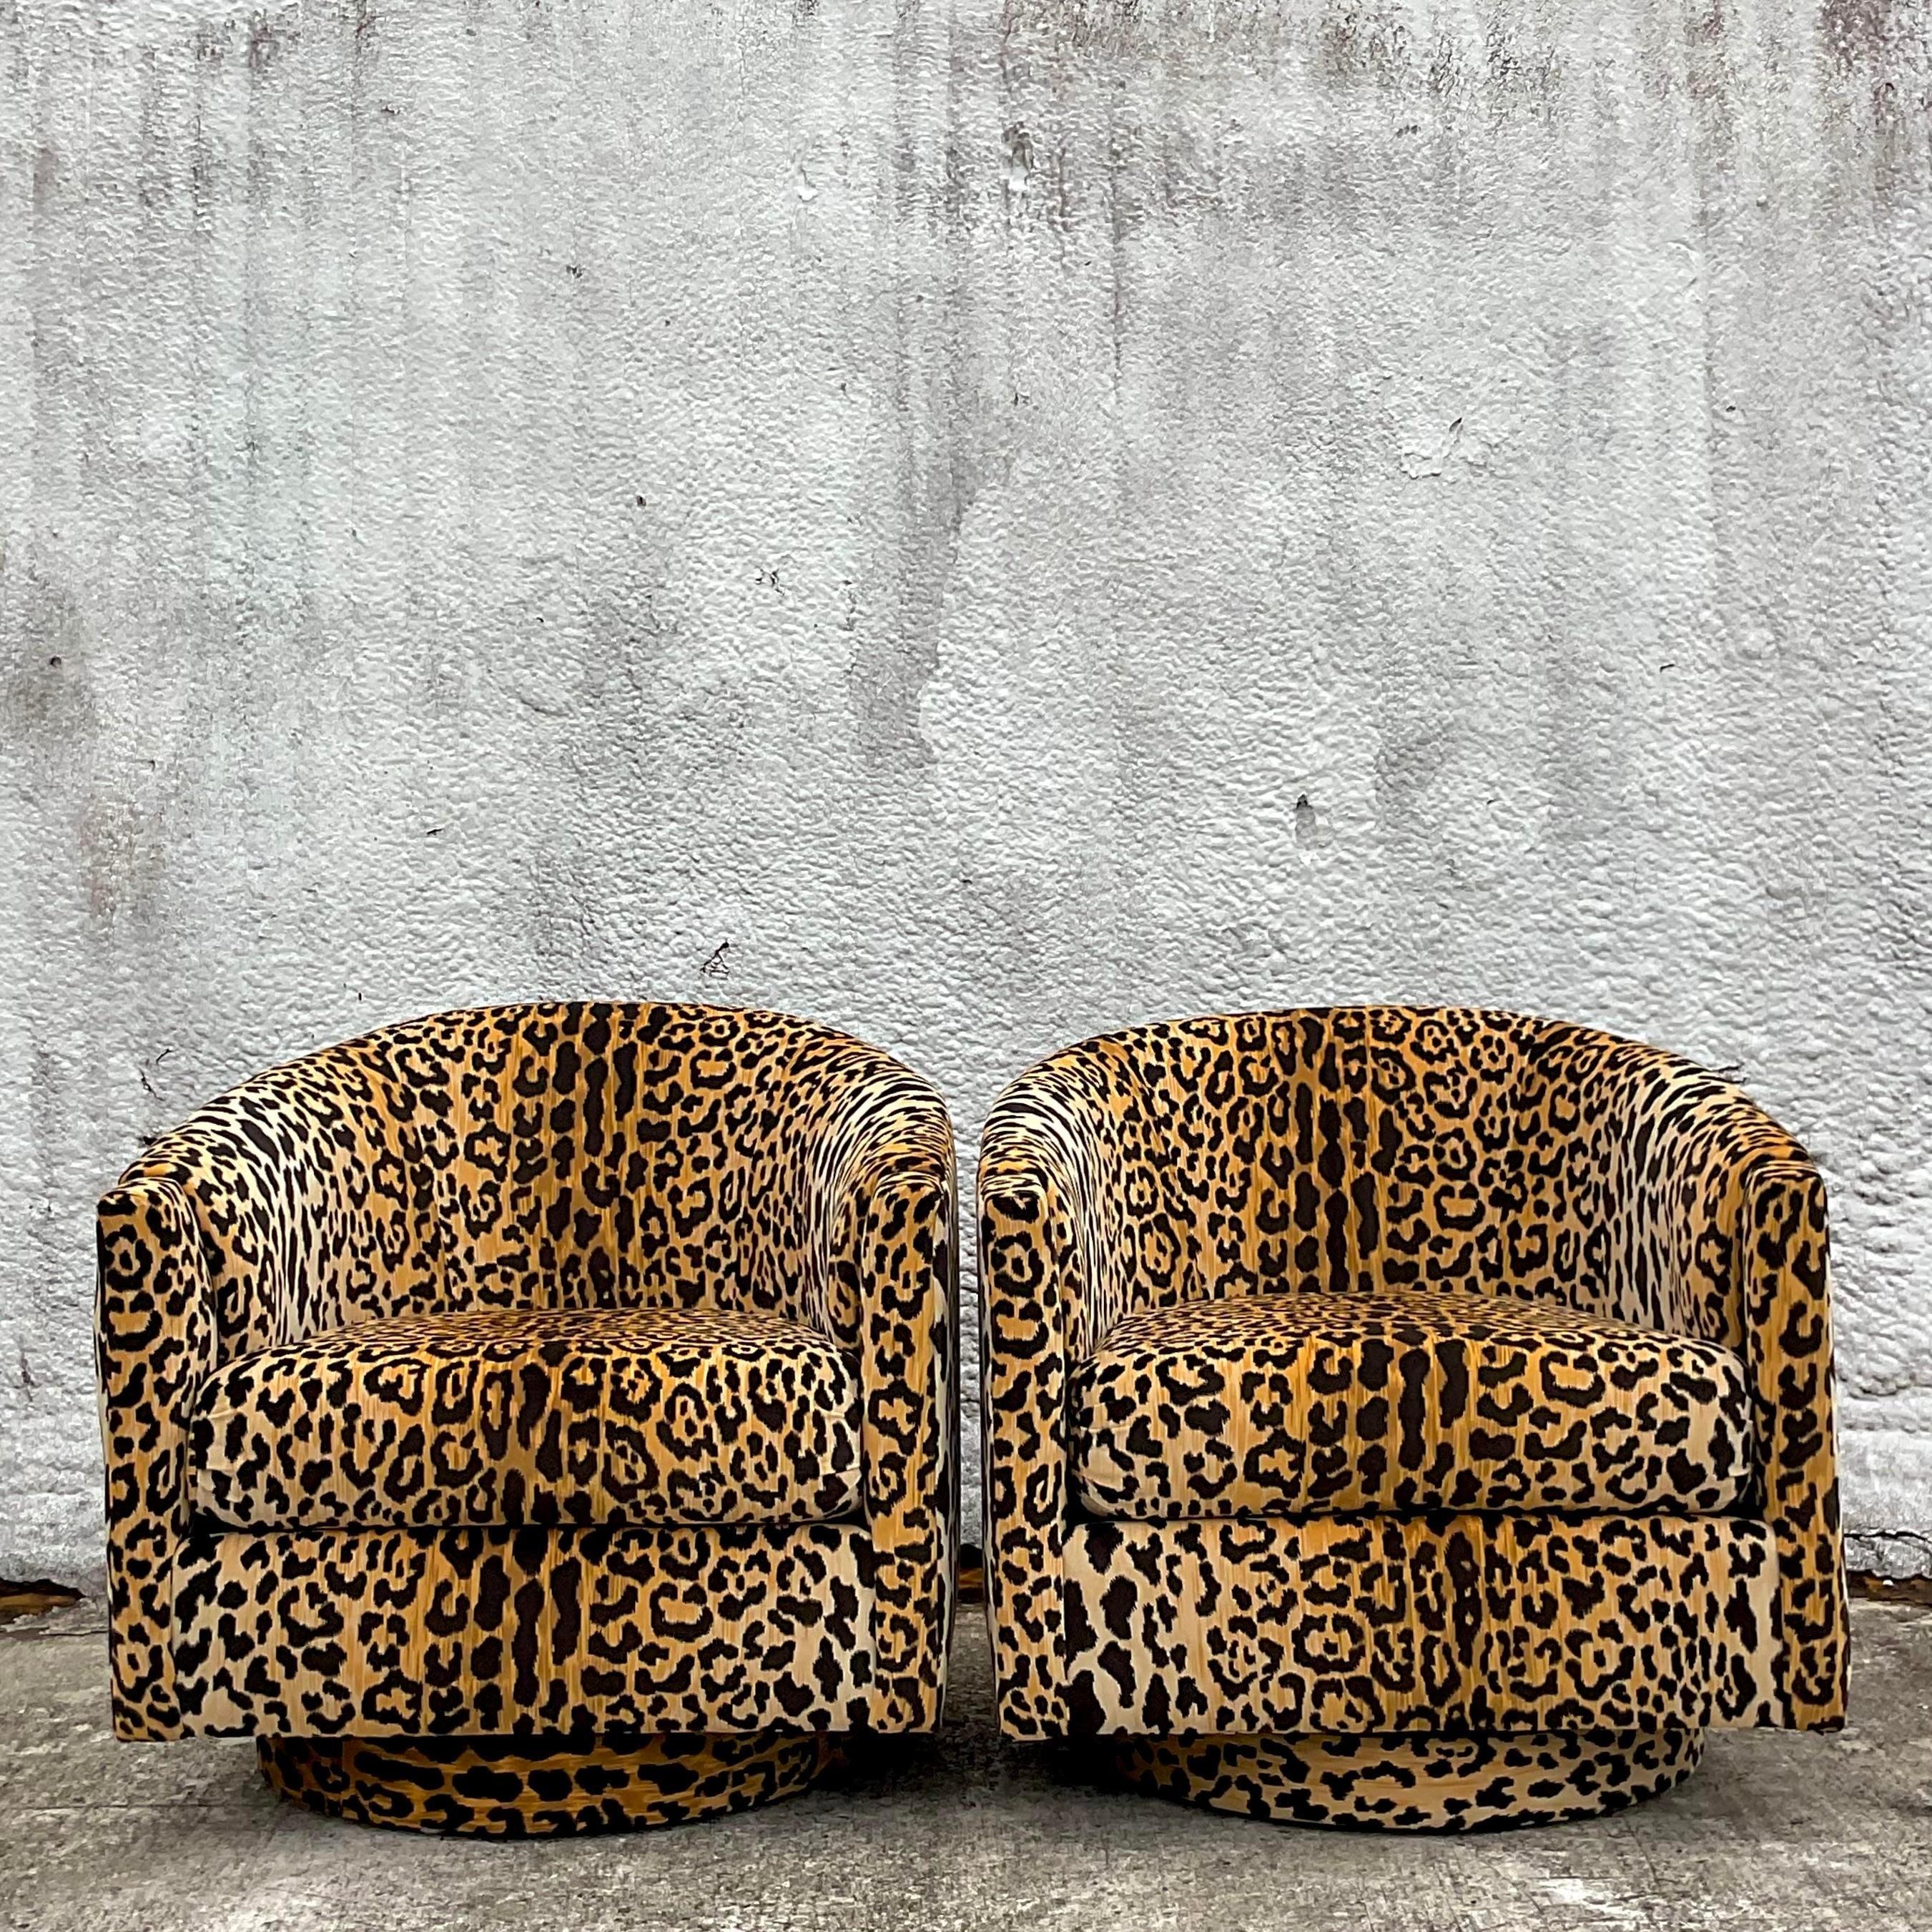 An insanely fabulous pair of vintage swivel chairs. Gorgeous Clarence House “Samburu” velvet leopard in pristine condition. Wide upholstered wooden plinth on the bottom. Acquired from a Palm Beach estate